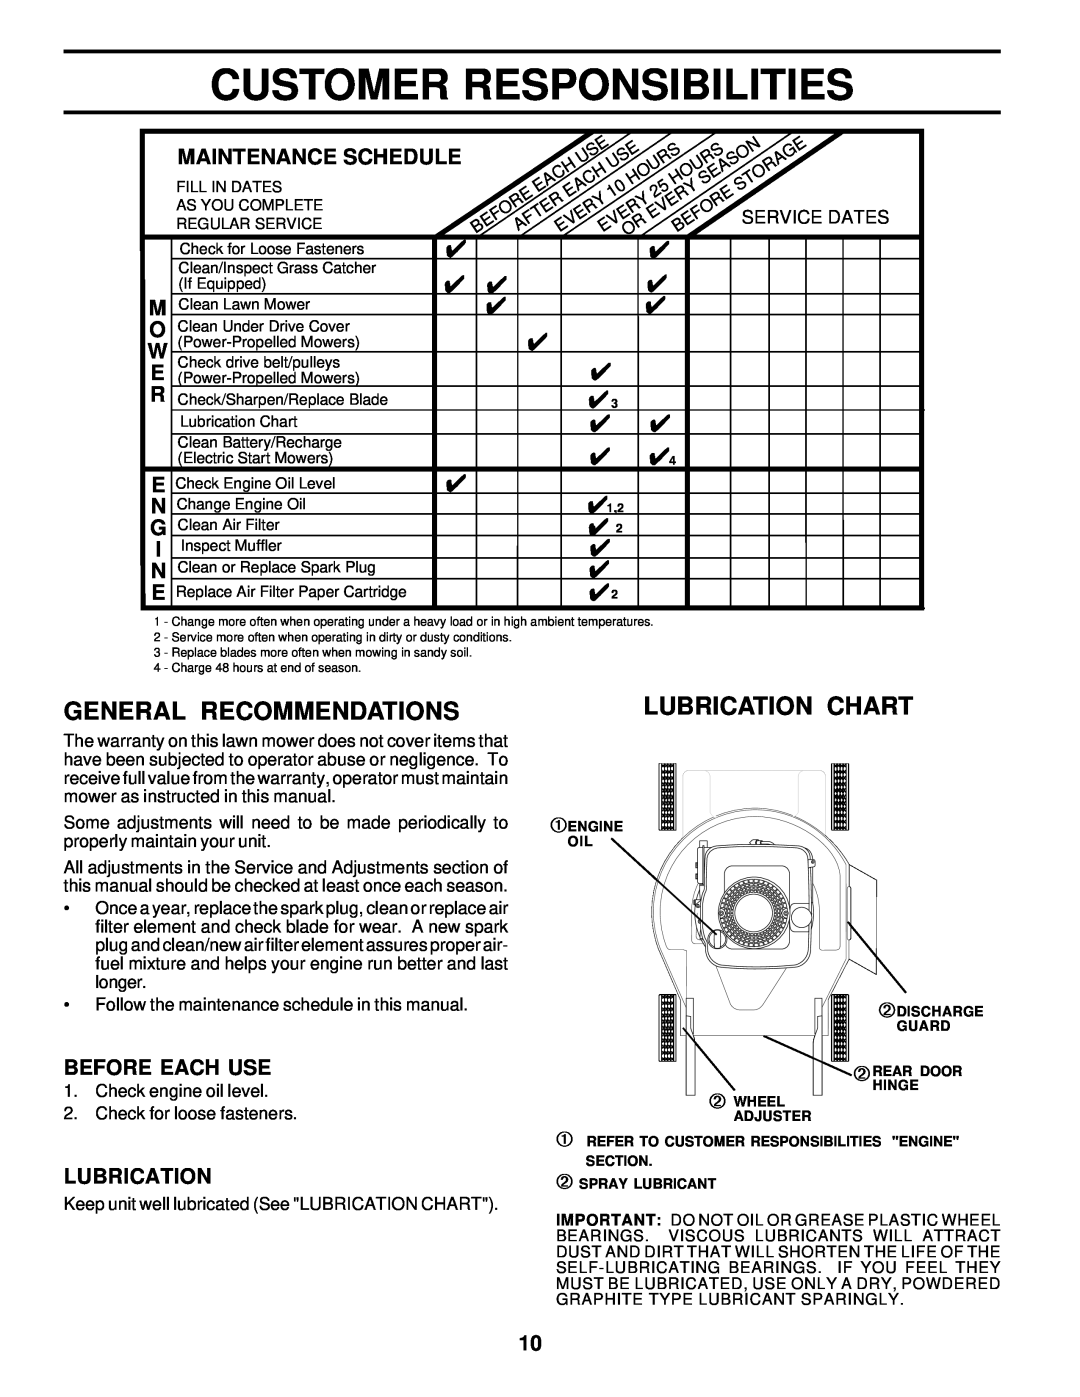 Husqvarna 6522CH owner manual Customer Responsibilities, General Recommendations, Lubrication Chart, Maintenance Schedule 